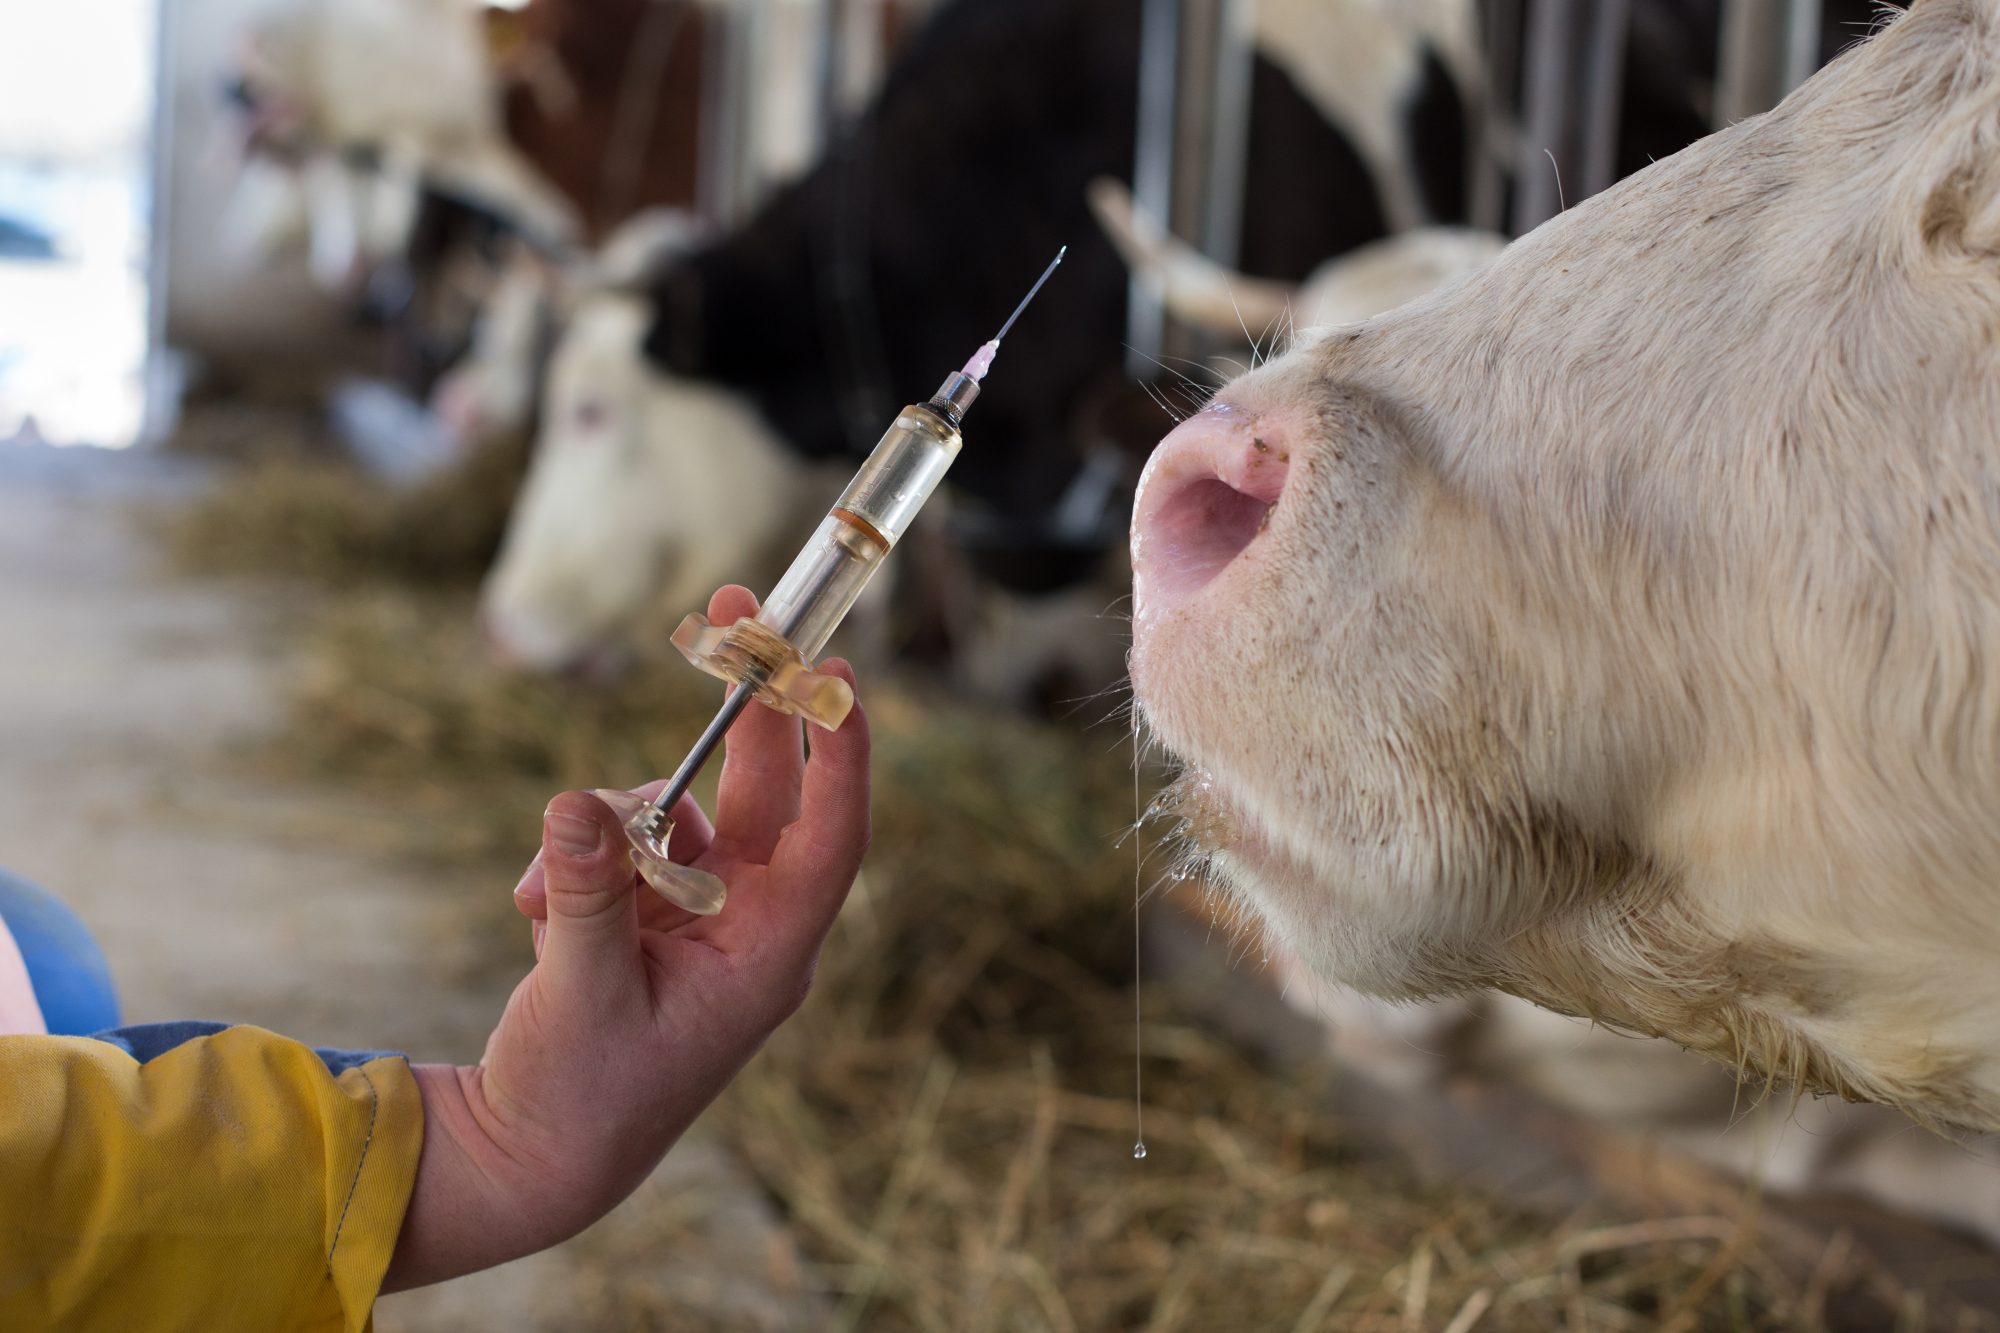 Benefits of animal vaccination for animals & people